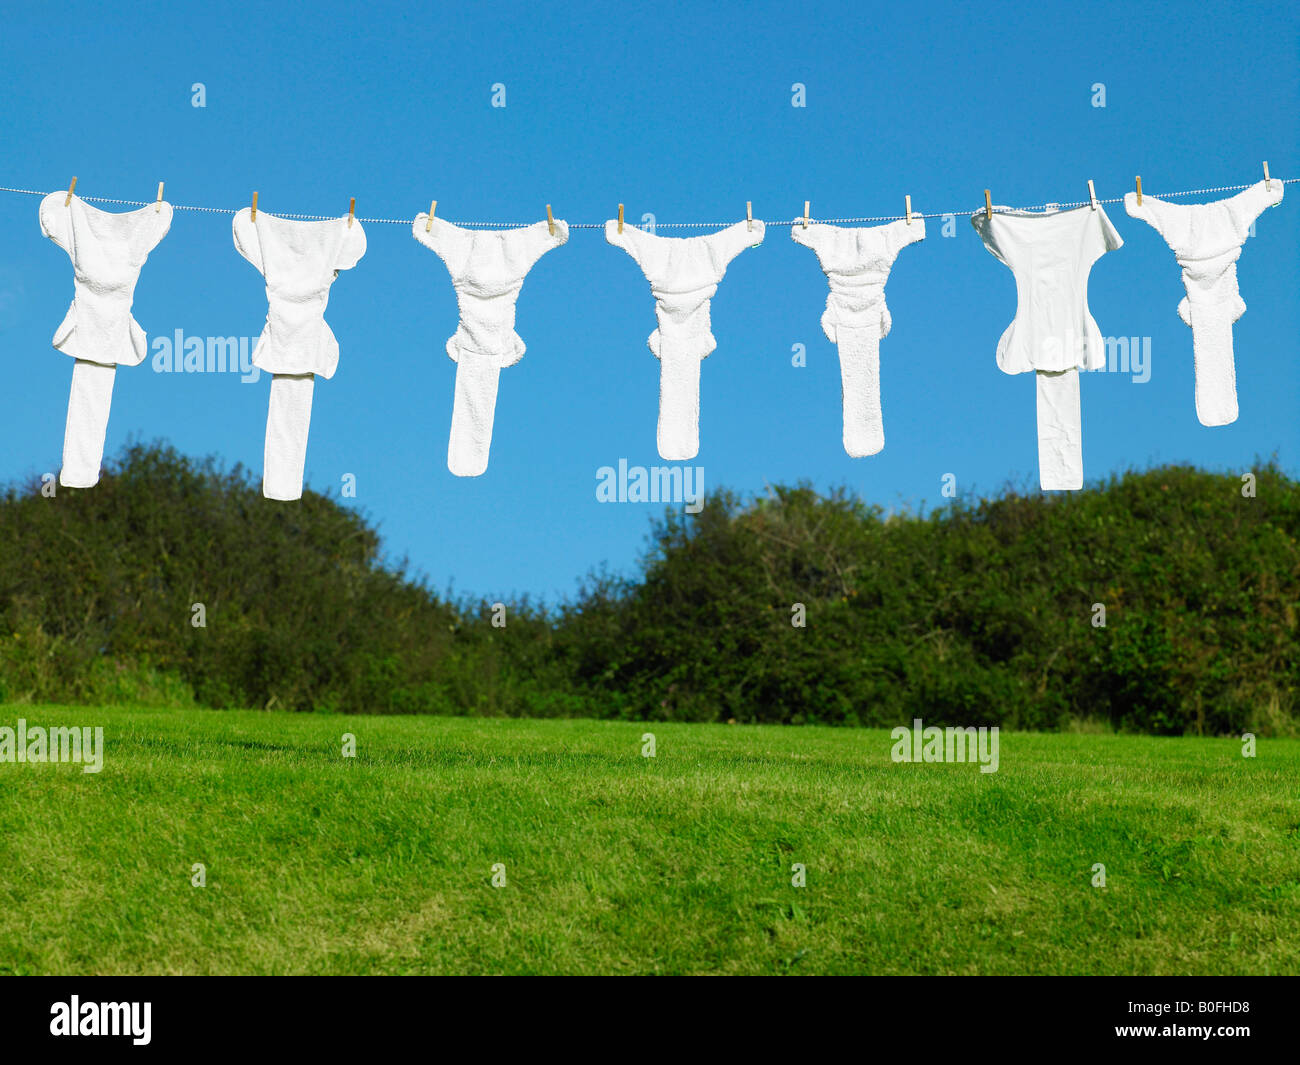 Nappies hanging on lave-line Banque D'Images